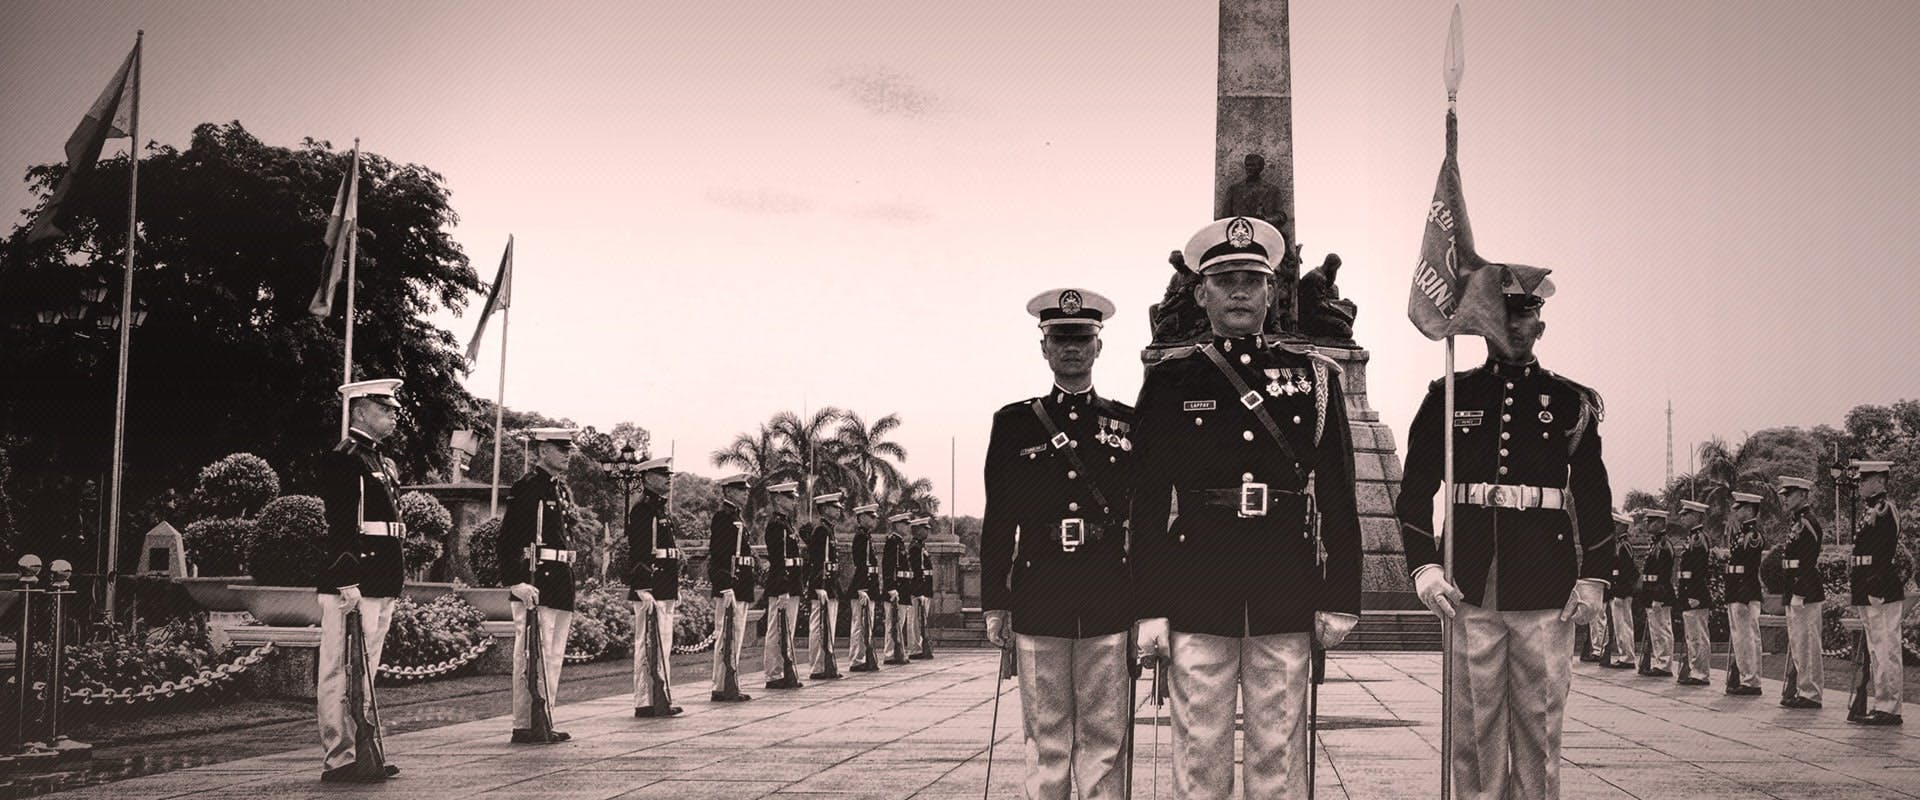 Black and white photo of a group of military personnel in full ceremonial uniforms, standing in formation near a monument with flags. They are surrounded by lush greenery, and the sky is lightly clouded.